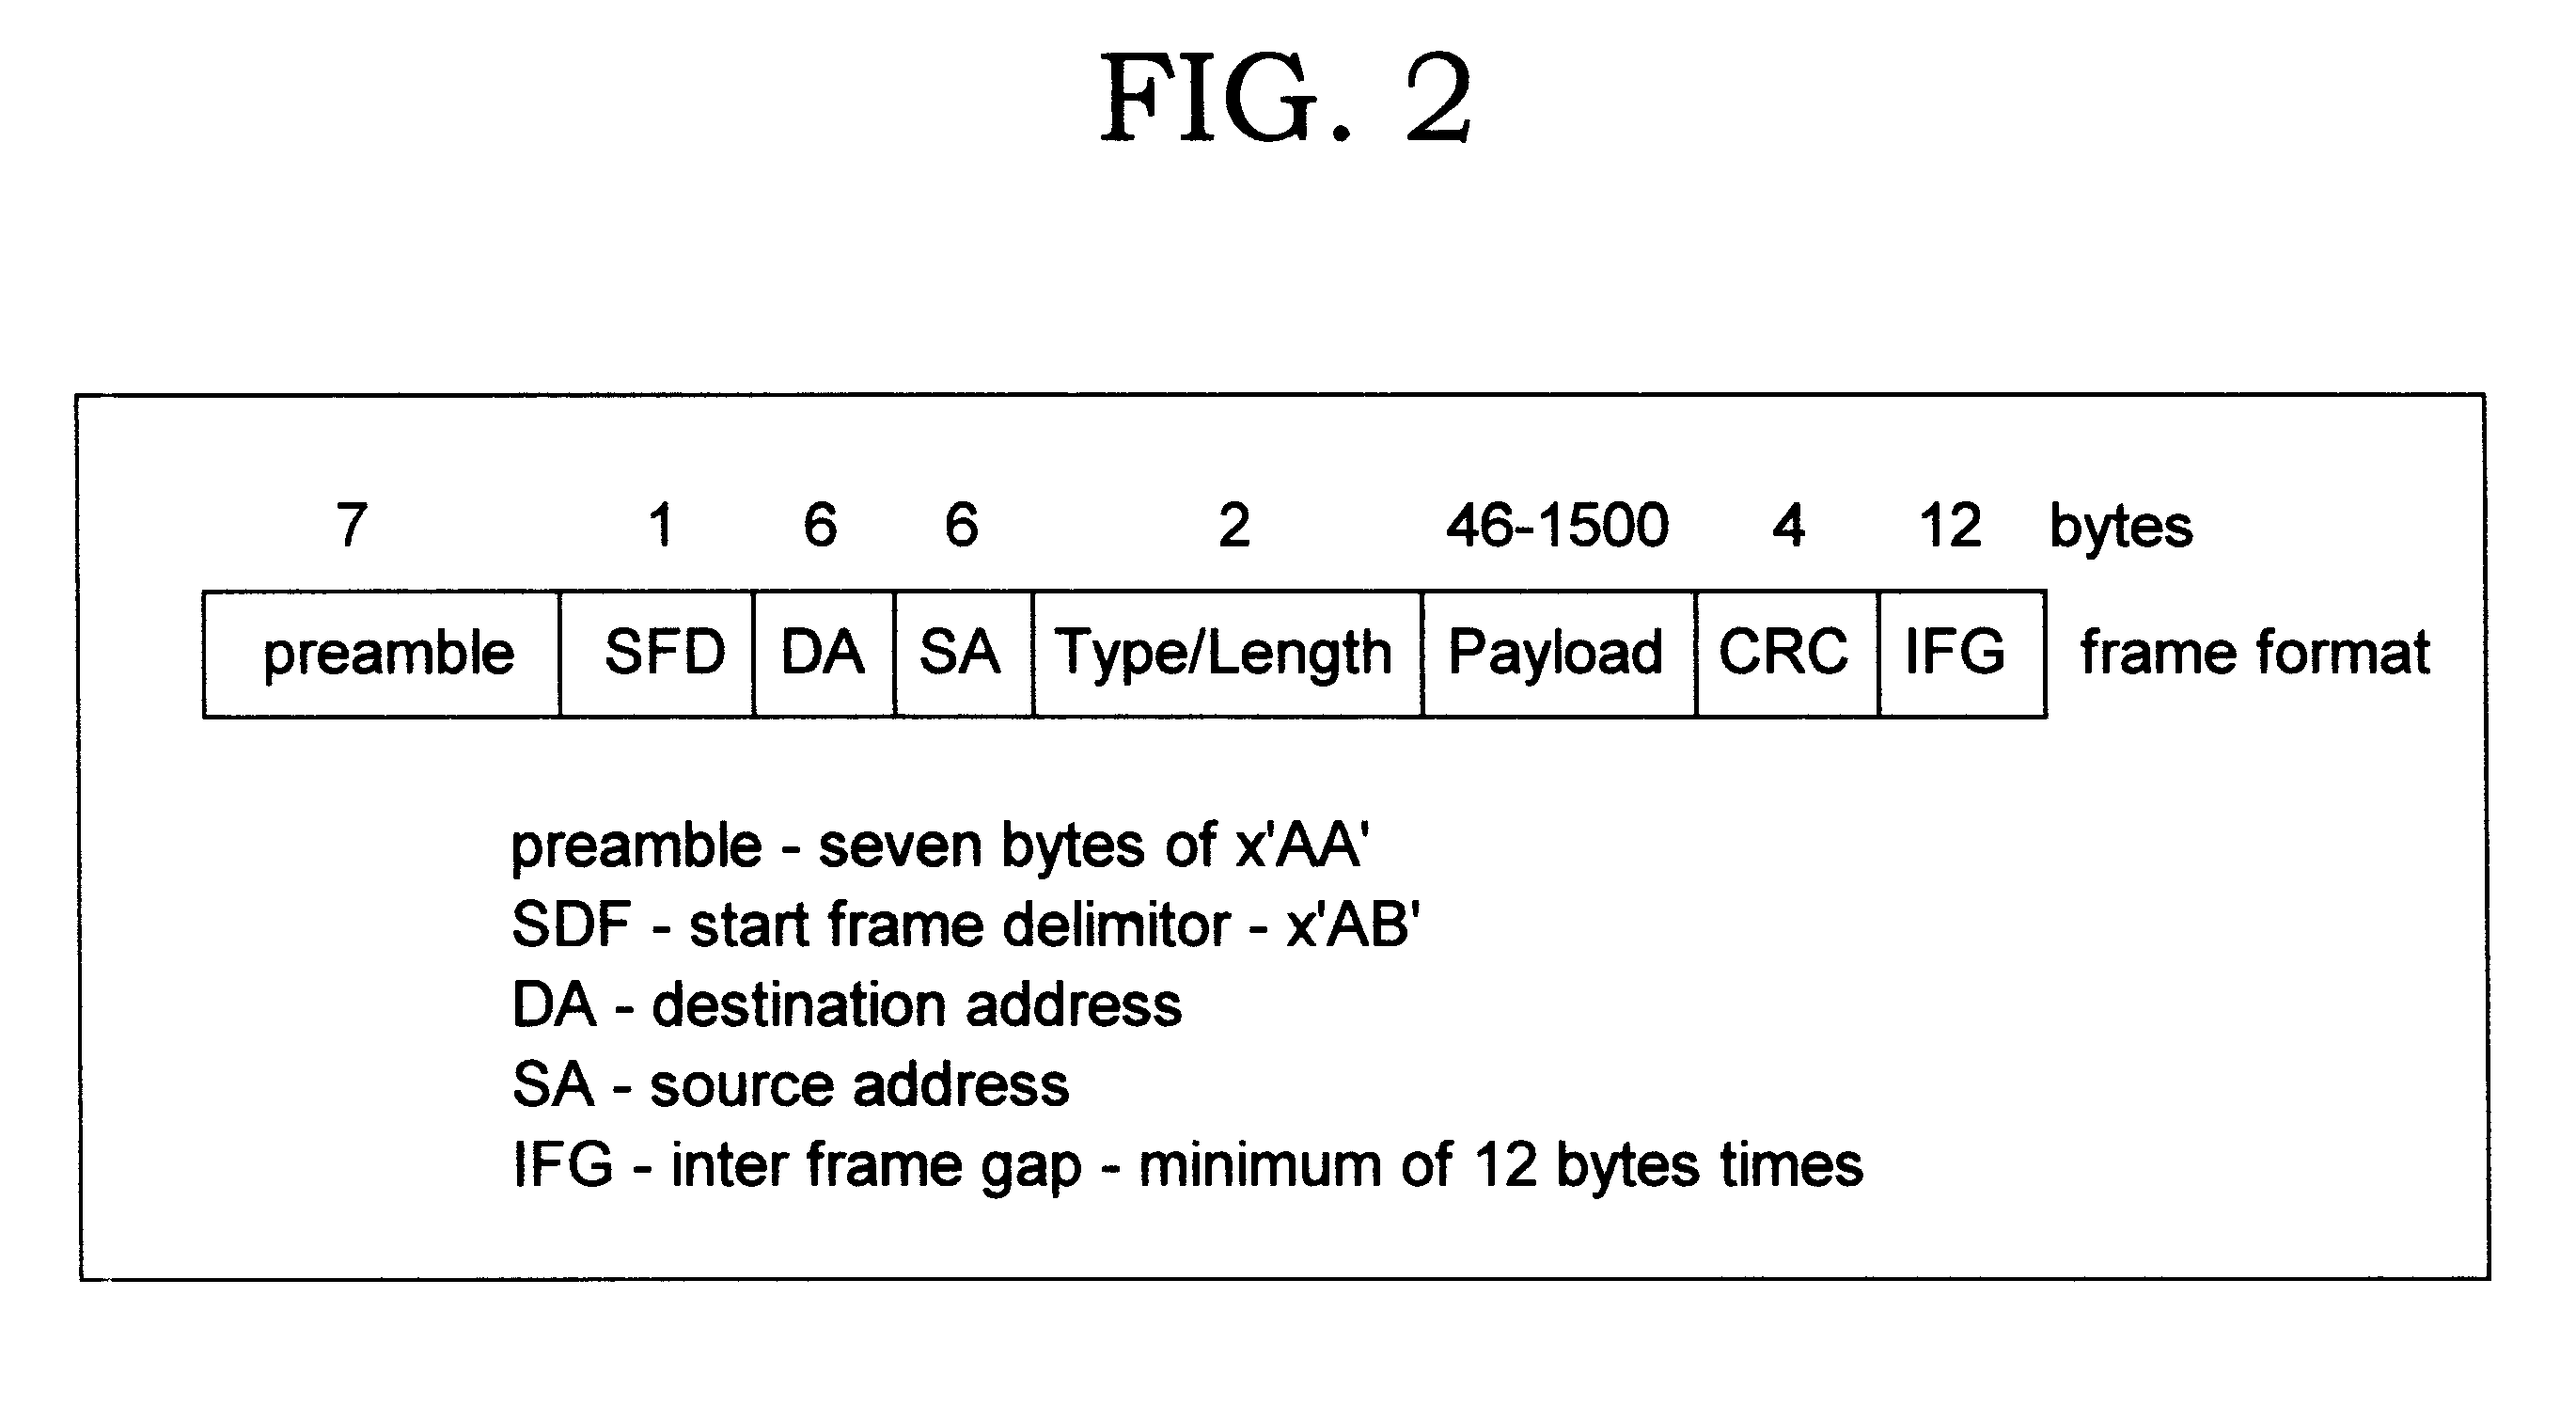 Architecture for a multi-port adapter with a single media access control (MAC)